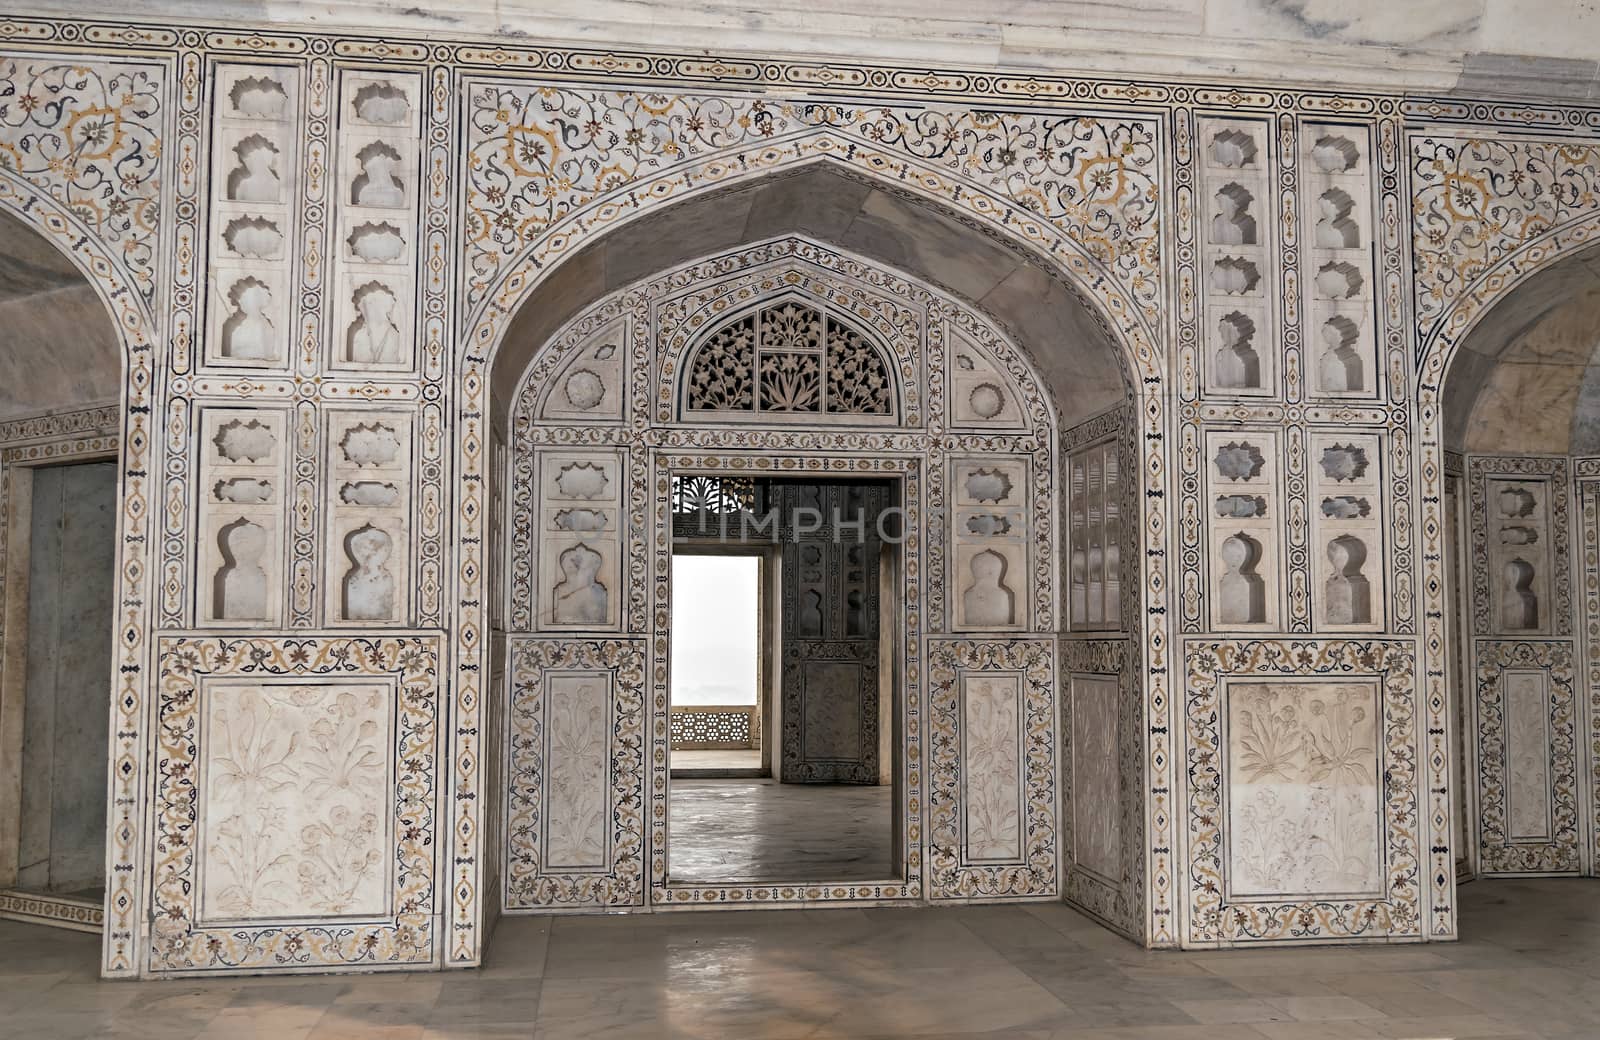 Exquisite carvings on entrance door of Red Fort in Agra, Uttar Pradesh, India. by lalam